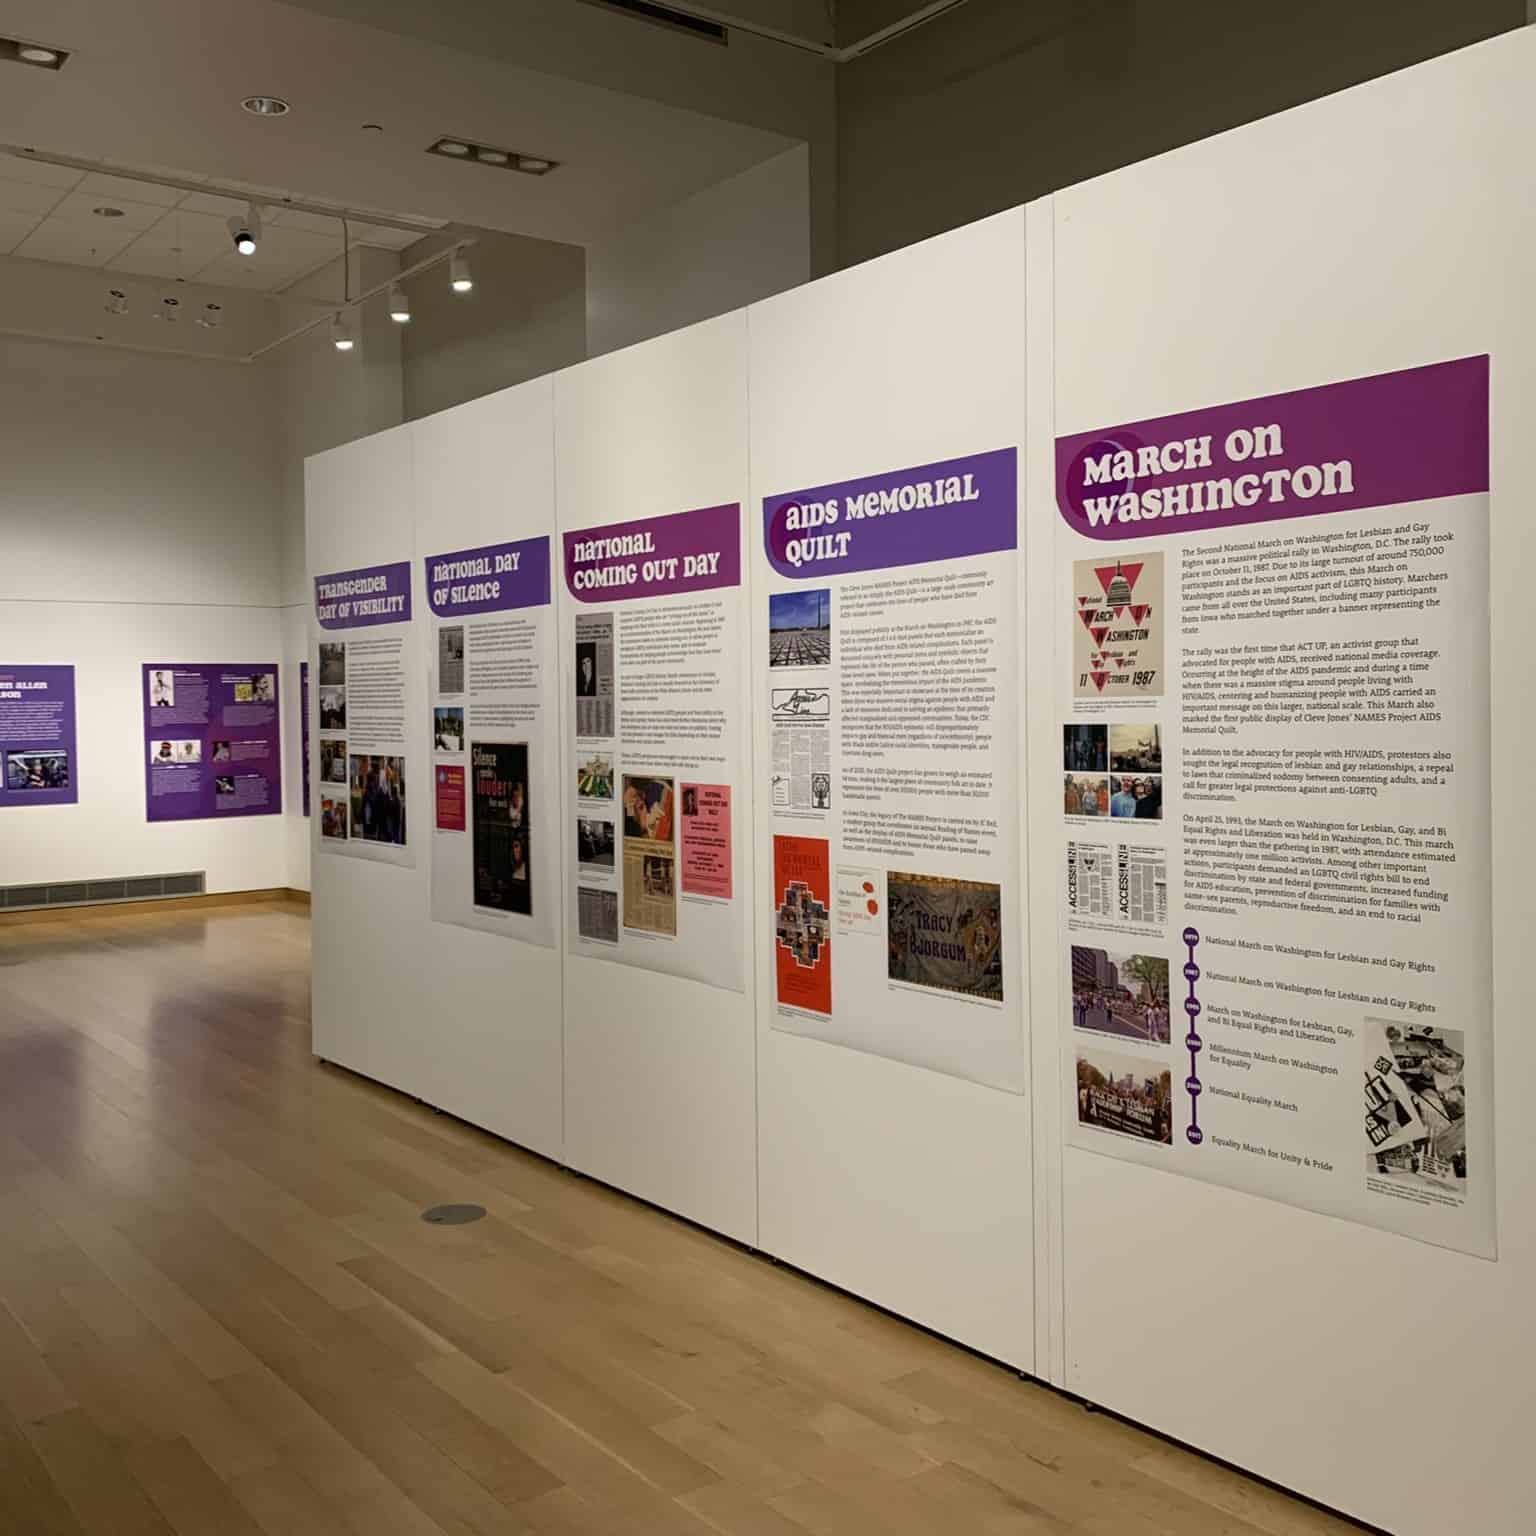 A series of posters are on a large white wall. The posters have headlines like March on Washington, National Coming Out Day, Transgender Day of Visibility, National Day of Silence.